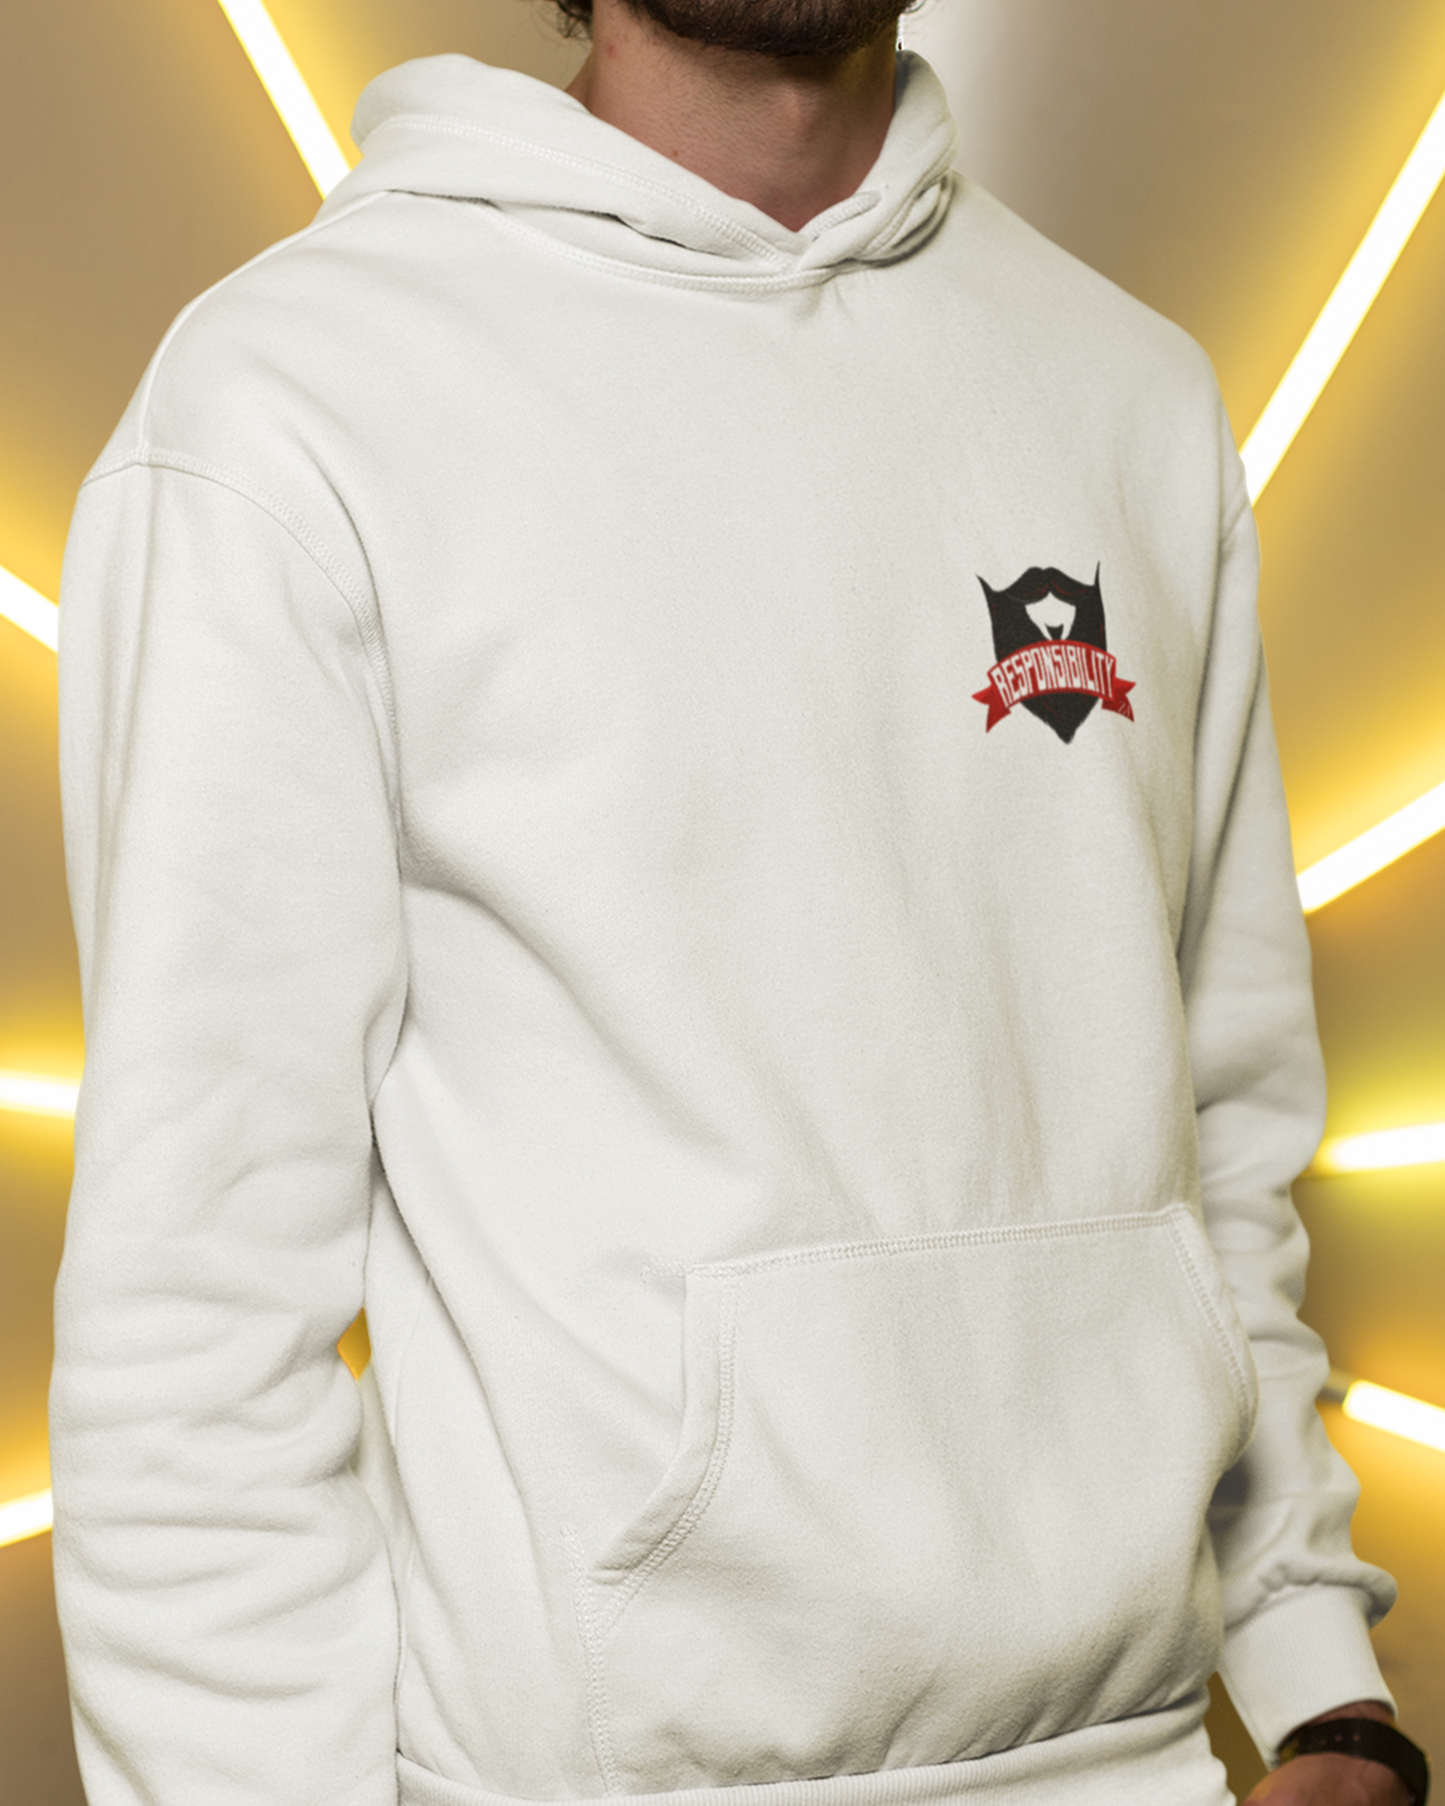 With Great Beard Comes Great Responsibility Hoodie